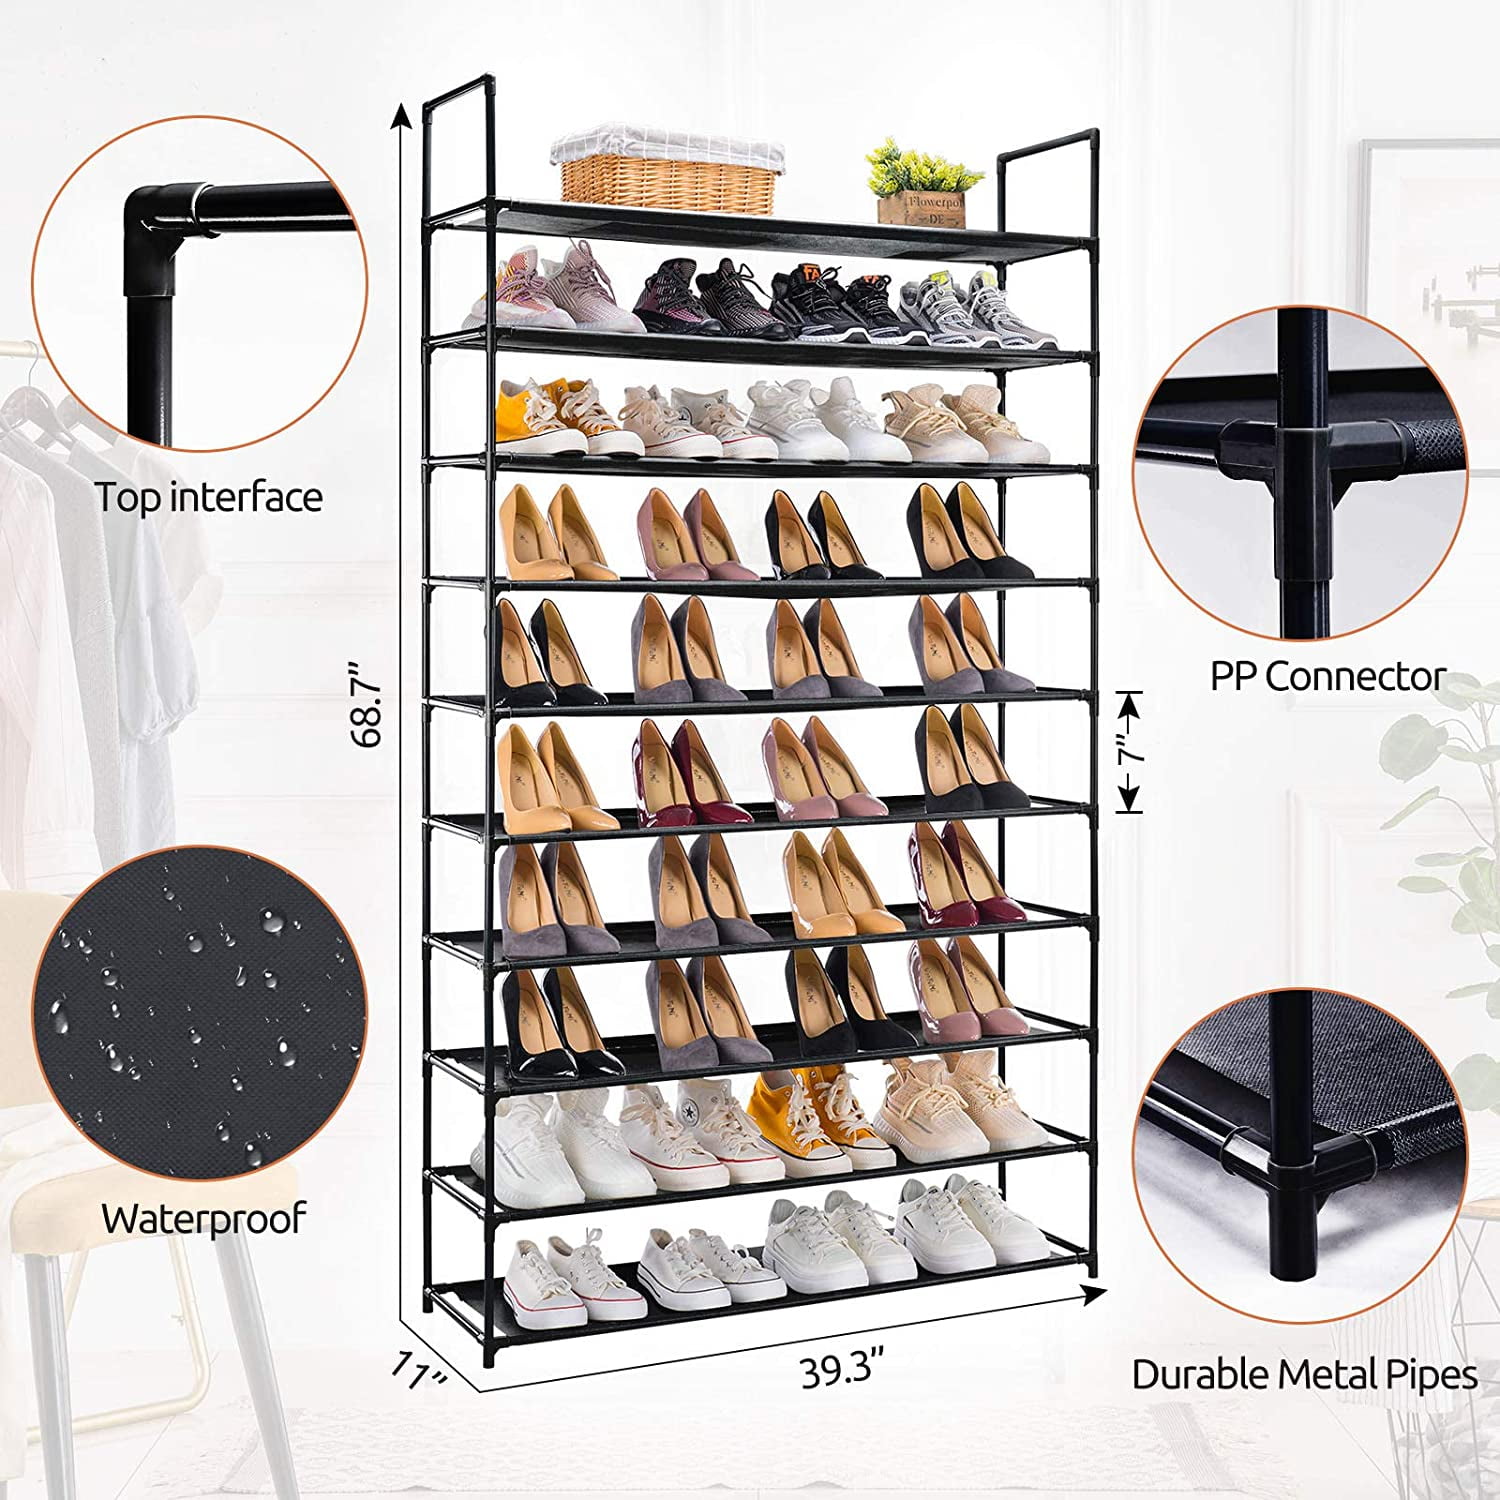 HOKEEPER Oxford Fabric 10 Tiers Shoe Rack,Improved Heavy Duty 50 Pairs Shoe  Organizer Storage Shelf, Standing Shoe Rack Supports 15lbs per tier for  boots, Heels…